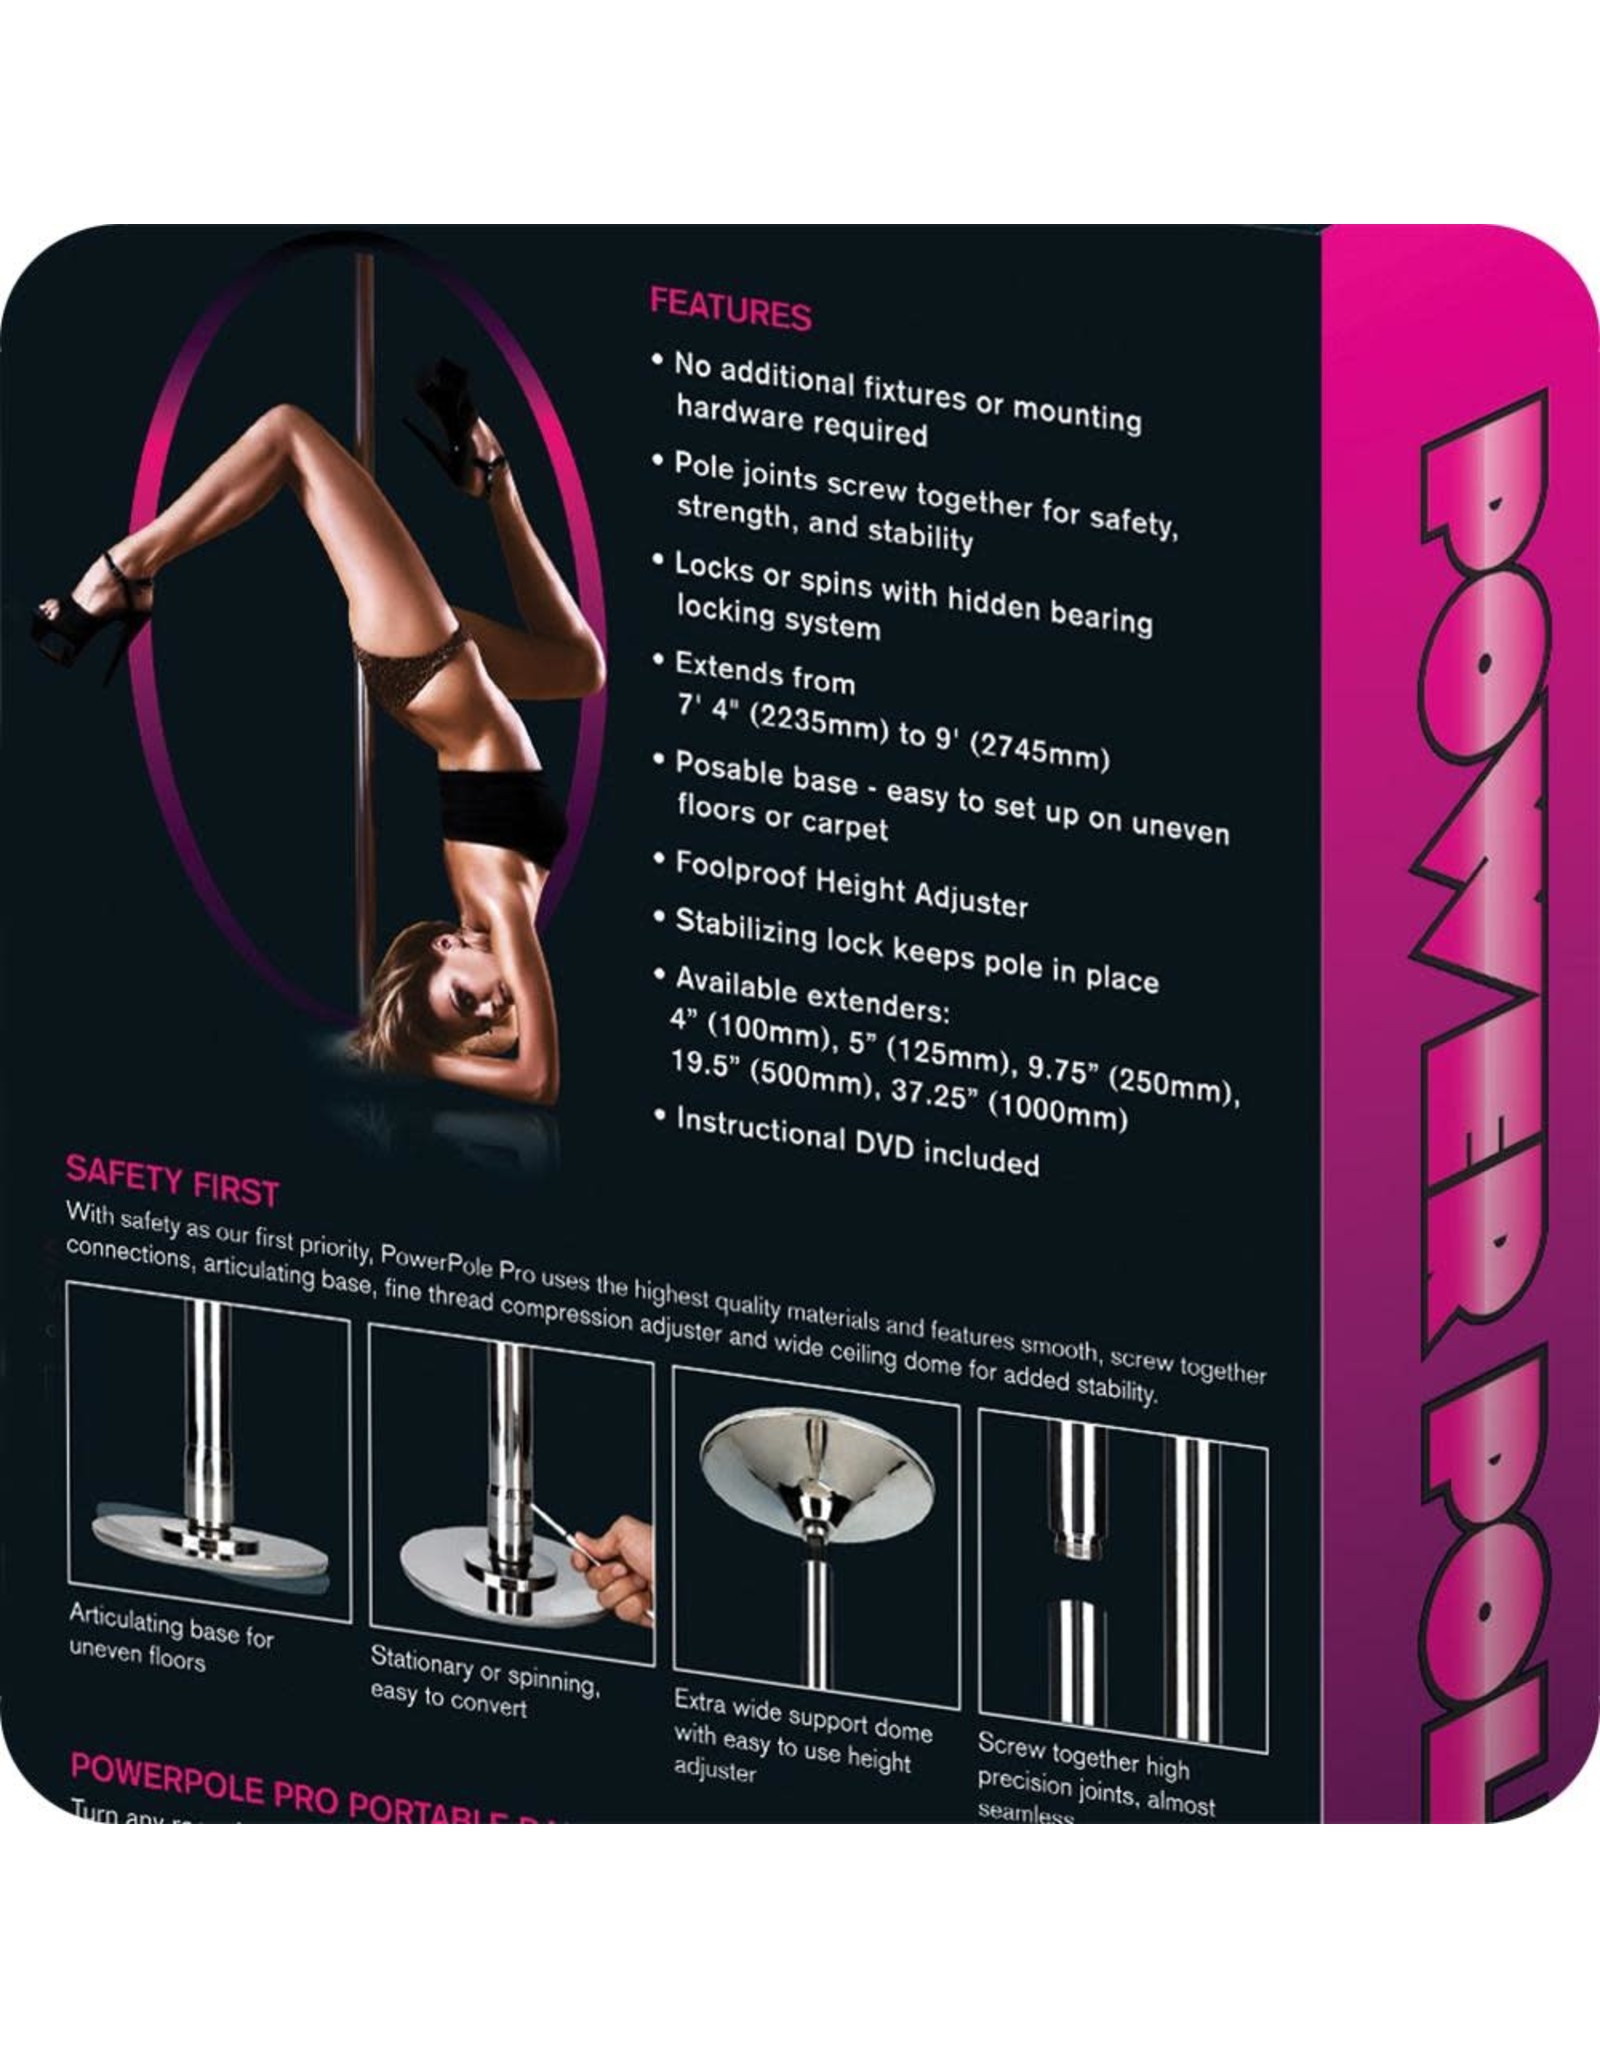 Power Pro - Professional Portable Dance and Exercise Pole Spinning